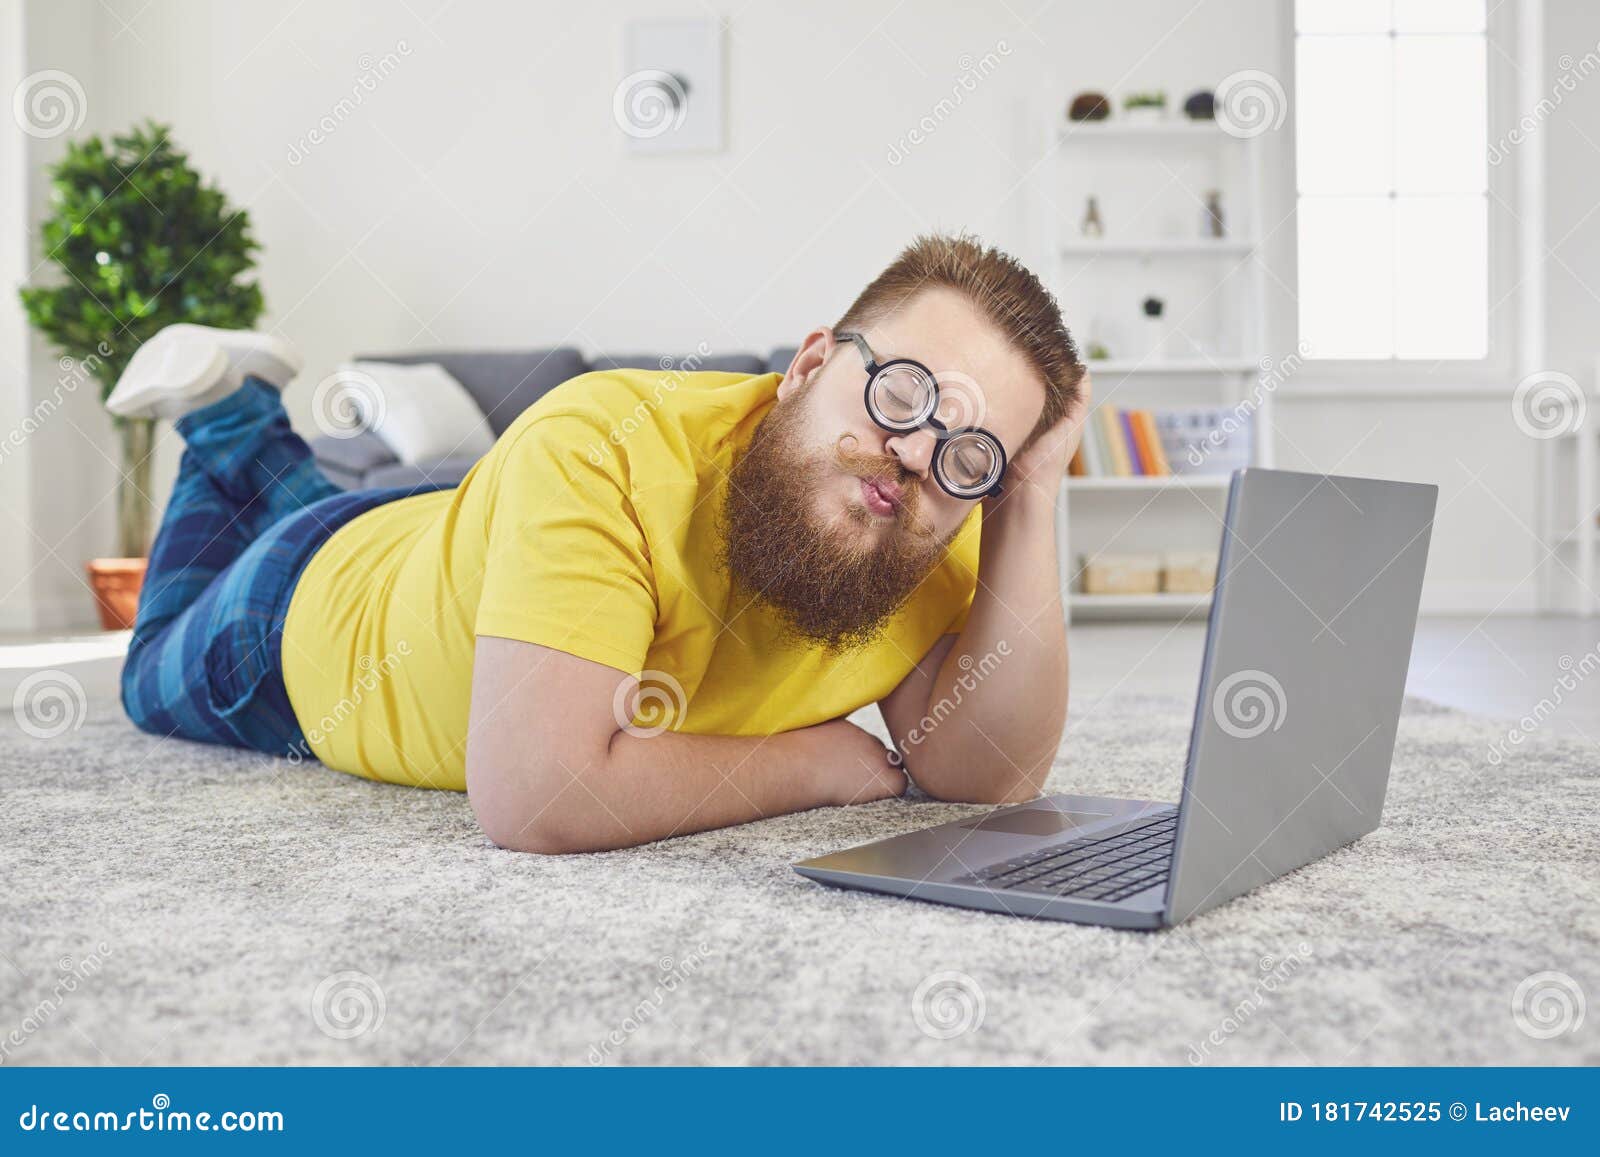 Online Dating Chat Video Chat  Fat Man in Glasses of a Fool with  a Laptop on a Date Online Video Call Chat Stock Image - Image of boyfriend,  people: 181742525